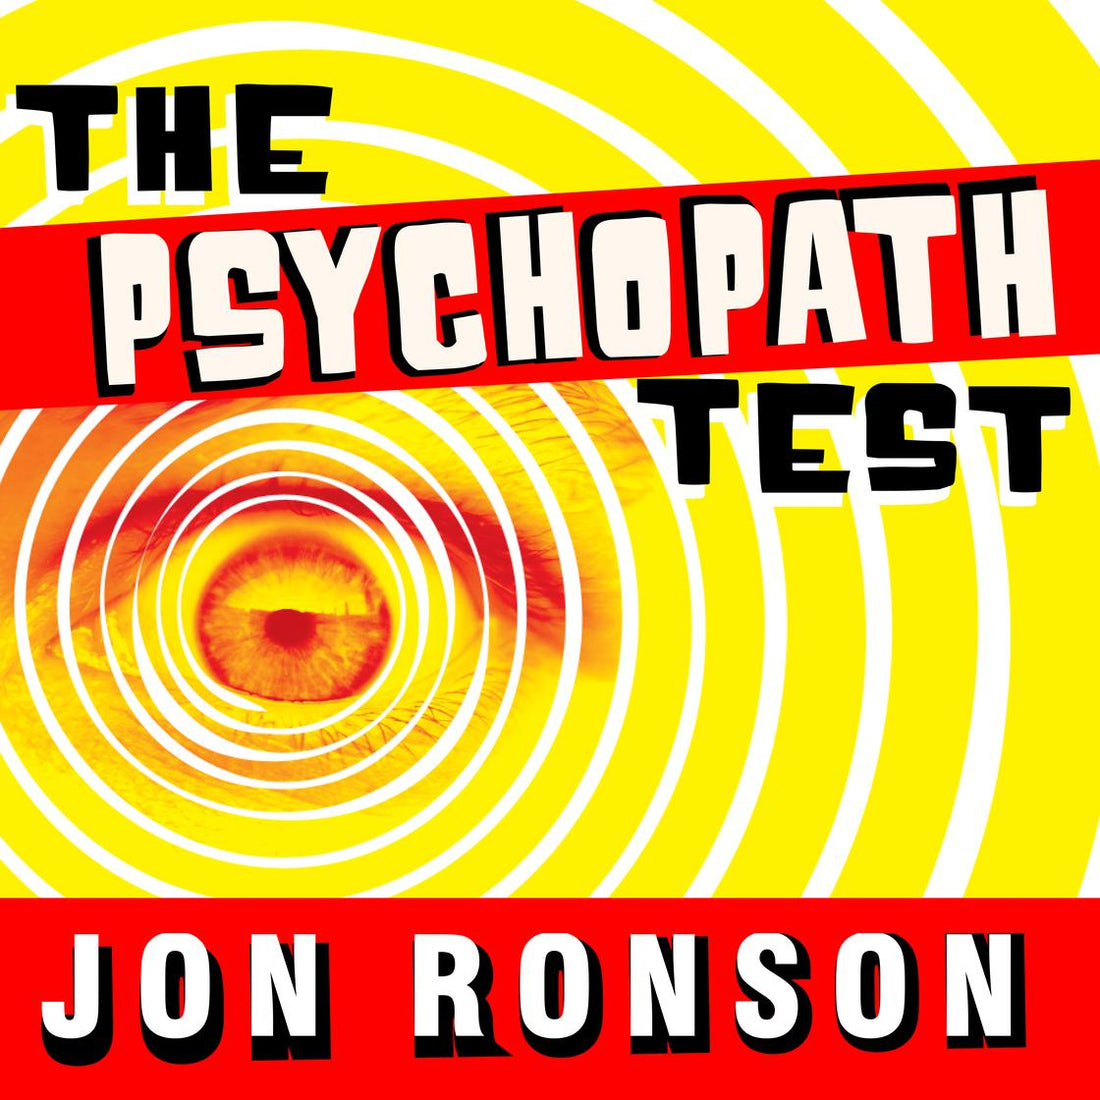 The Psychopath Test by Jon Ronson Learn with Tree